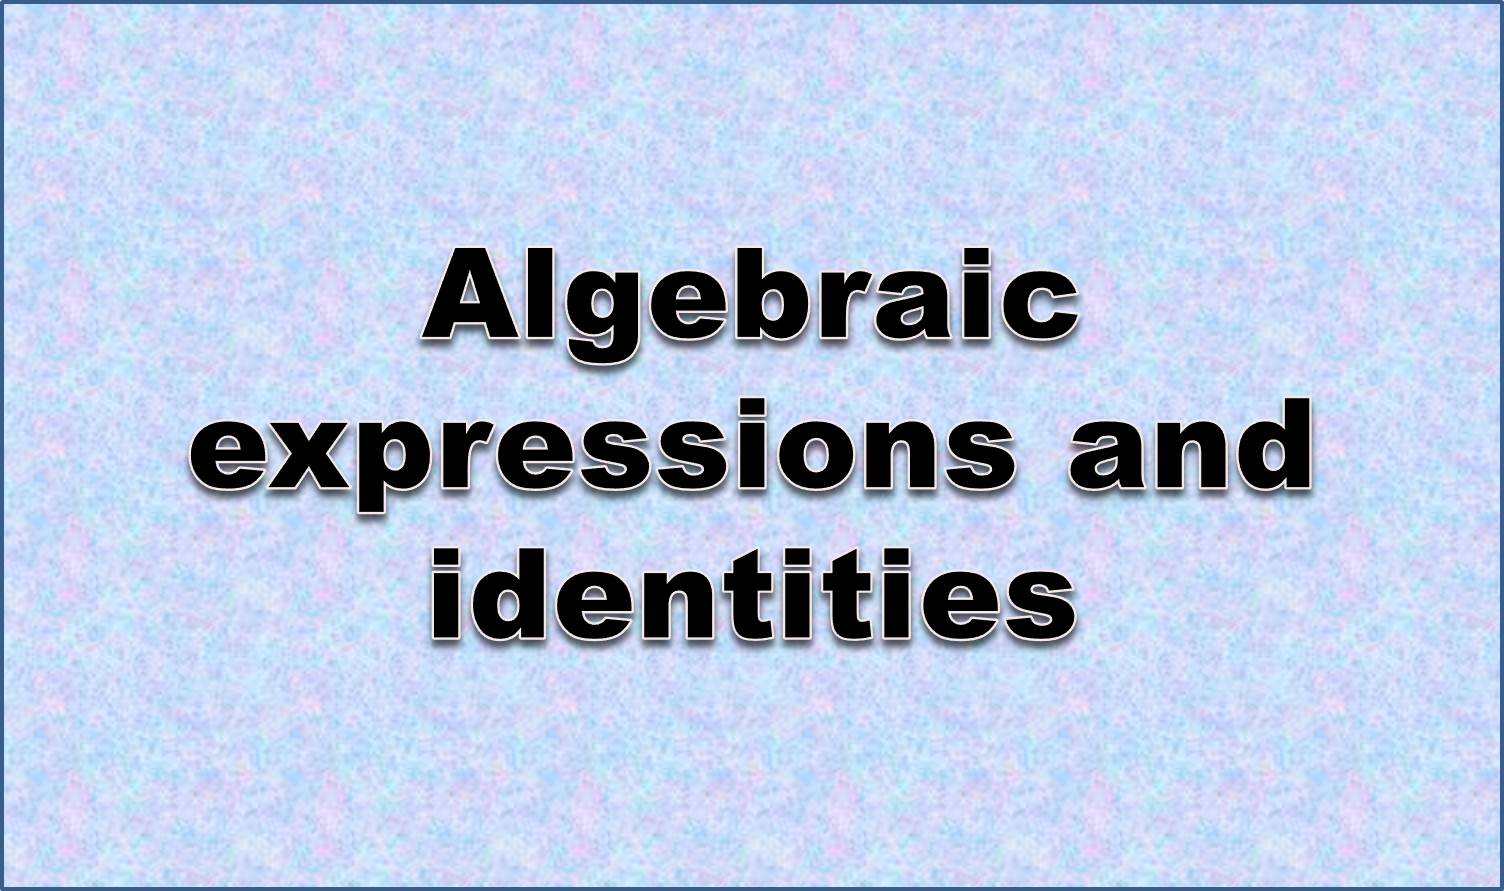 http://study.aisectonline.com/images/Algebraic expressions and identities11.jpg